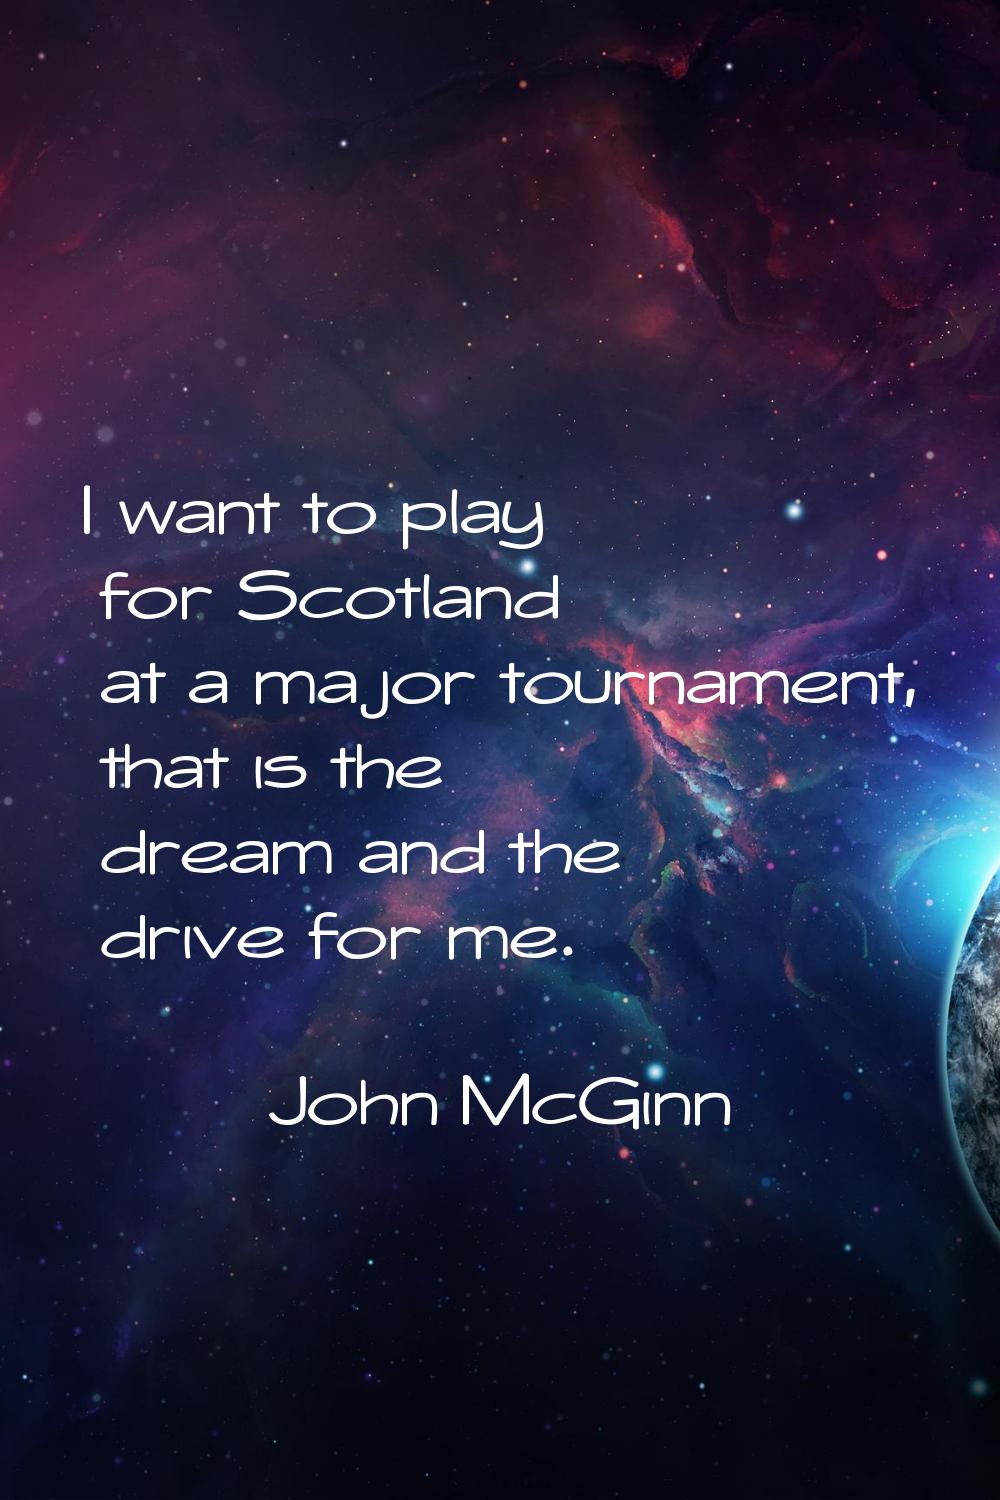 I want to play for Scotland at a major tournament, that is the dream and the drive for me.